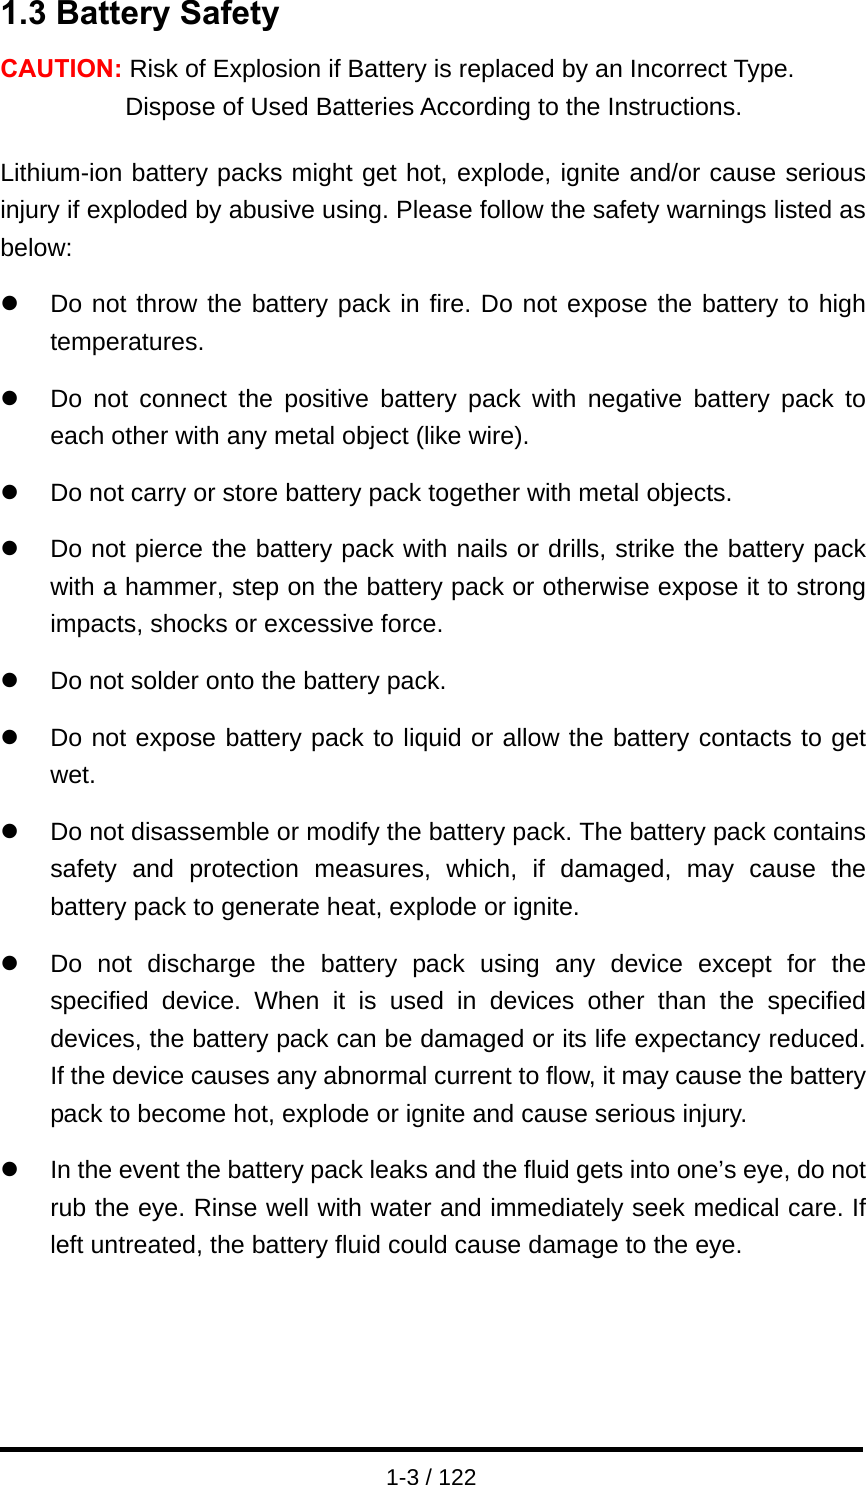  1-3 / 122 1.3 Battery Safety CAUTION: Risk of Explosion if Battery is replaced by an Incorrect Type. Dispose of Used Batteries According to the Instructions.  Lithium-ion battery packs might get hot, explode, ignite and/or cause serious injury if exploded by abusive using. Please follow the safety warnings listed as below:  z  Do not throw the battery pack in fire. Do not expose the battery to high temperatures.  z  Do not connect the positive battery pack with negative battery pack to each other with any metal object (like wire).  z  Do not carry or store battery pack together with metal objects.  z  Do not pierce the battery pack with nails or drills, strike the battery pack with a hammer, step on the battery pack or otherwise expose it to strong impacts, shocks or excessive force.  z  Do not solder onto the battery pack.  z  Do not expose battery pack to liquid or allow the battery contacts to get wet.  z  Do not disassemble or modify the battery pack. The battery pack contains safety and protection measures, which, if damaged, may cause the battery pack to generate heat, explode or ignite.  z  Do not discharge the battery pack using any device except for the specified device. When it is used in devices other than the specified devices, the battery pack can be damaged or its life expectancy reduced. If the device causes any abnormal current to flow, it may cause the battery pack to become hot, explode or ignite and cause serious injury.  z  In the event the battery pack leaks and the fluid gets into one’s eye, do not rub the eye. Rinse well with water and immediately seek medical care. If left untreated, the battery fluid could cause damage to the eye.     